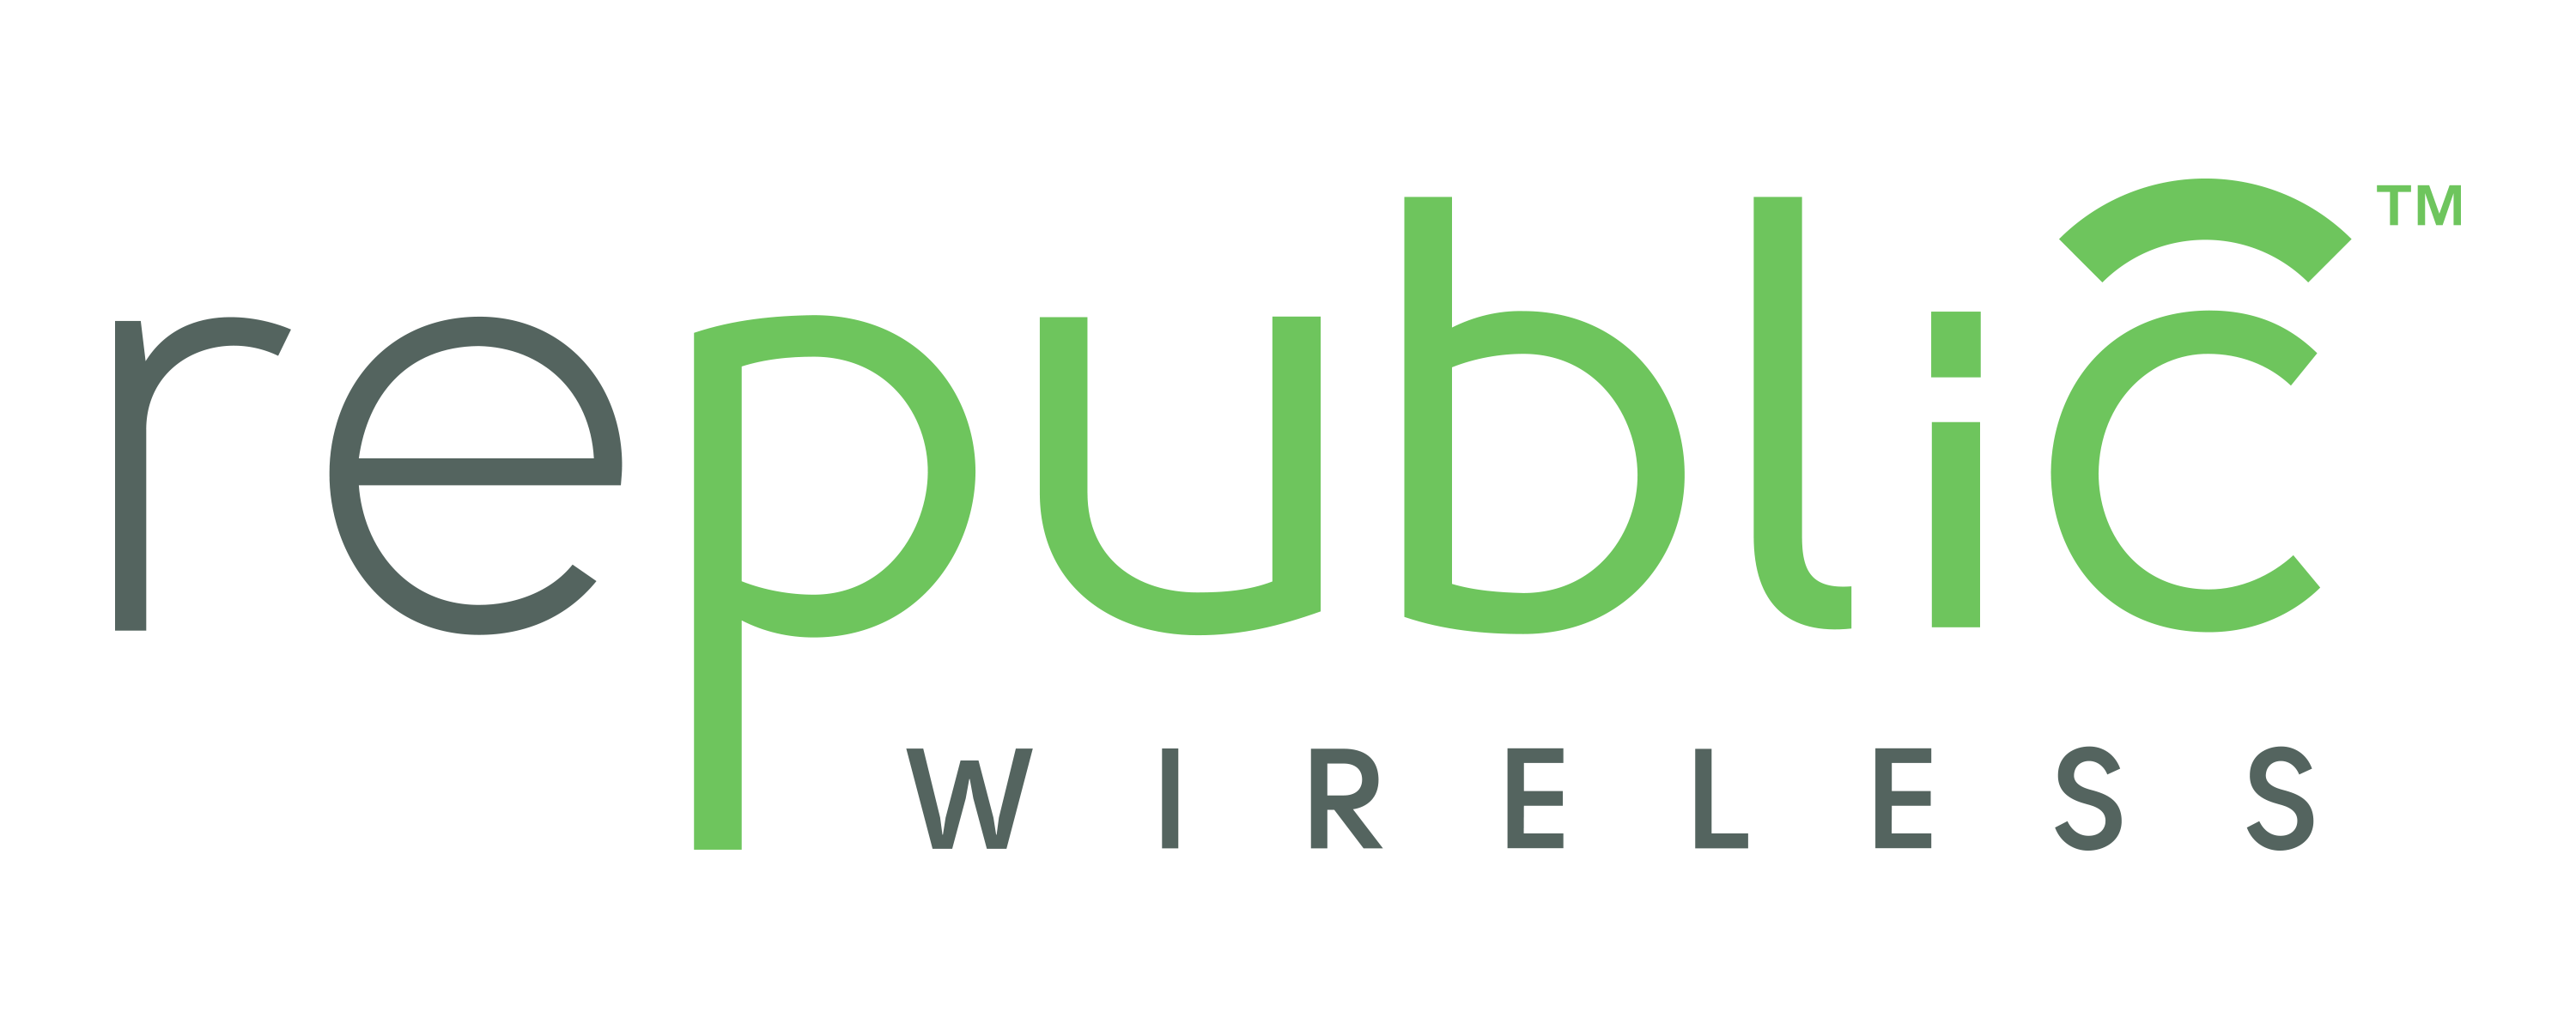 Keeping families better connected: WiFi calling innovator Republic Wireless to sponsor Capital Area Soccer League and US Club Soccer